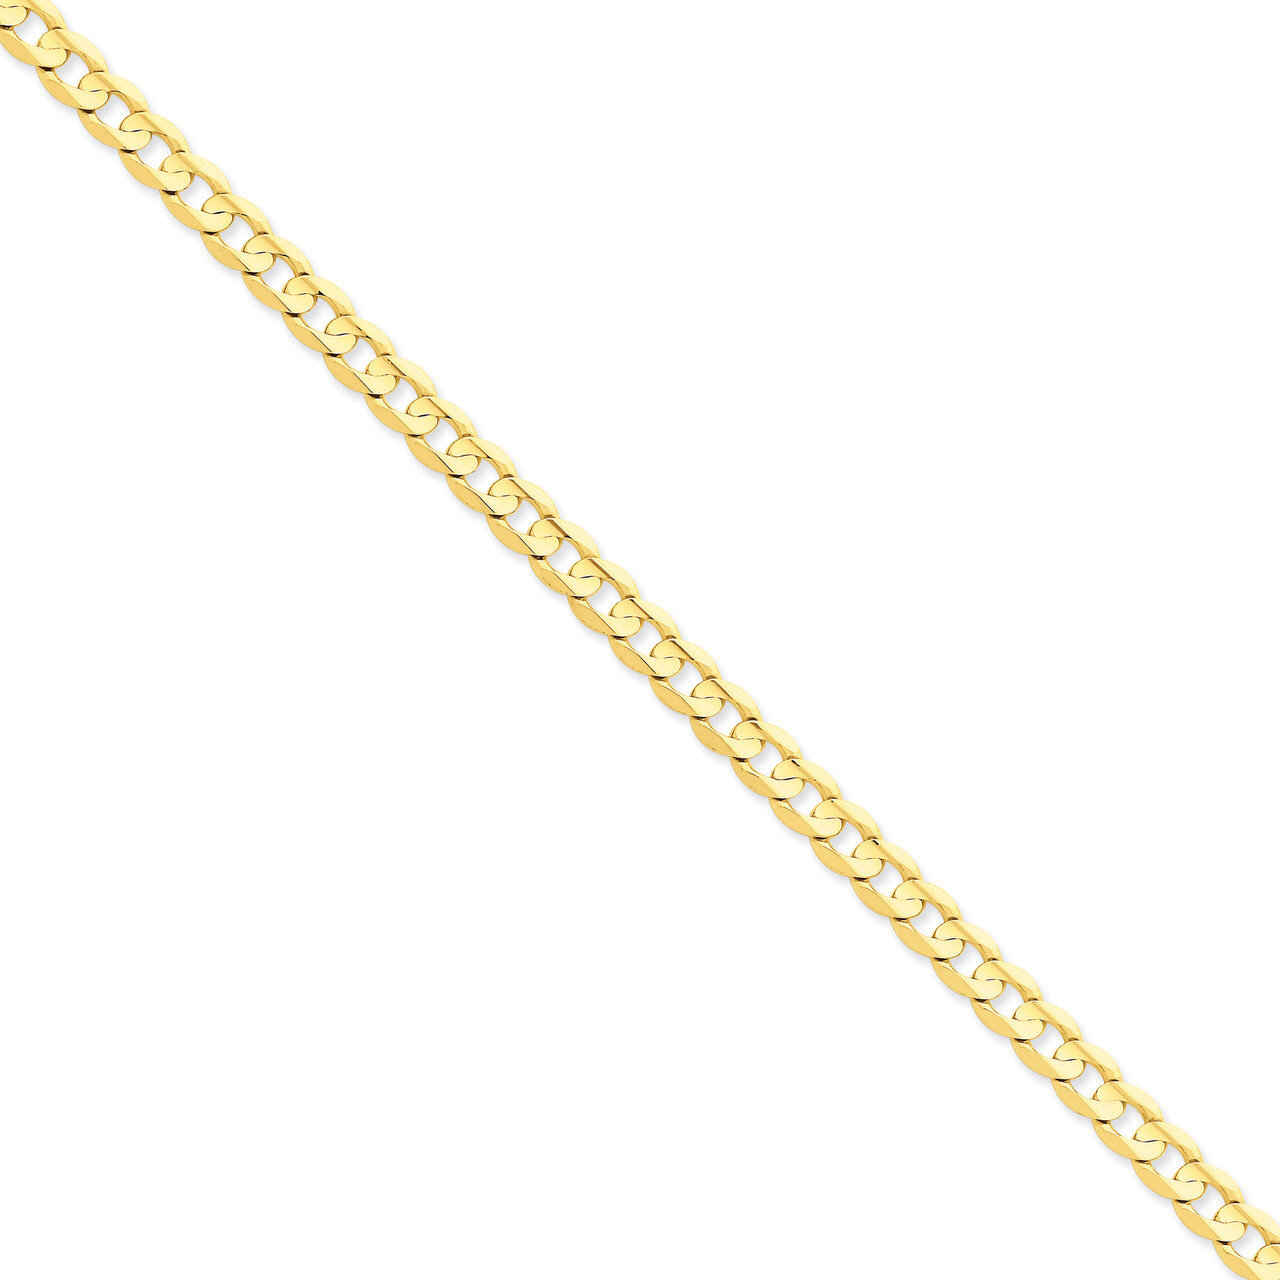 6.75mm Open Concave Curb Chain 24 Inch 14k Gold LCR180-24